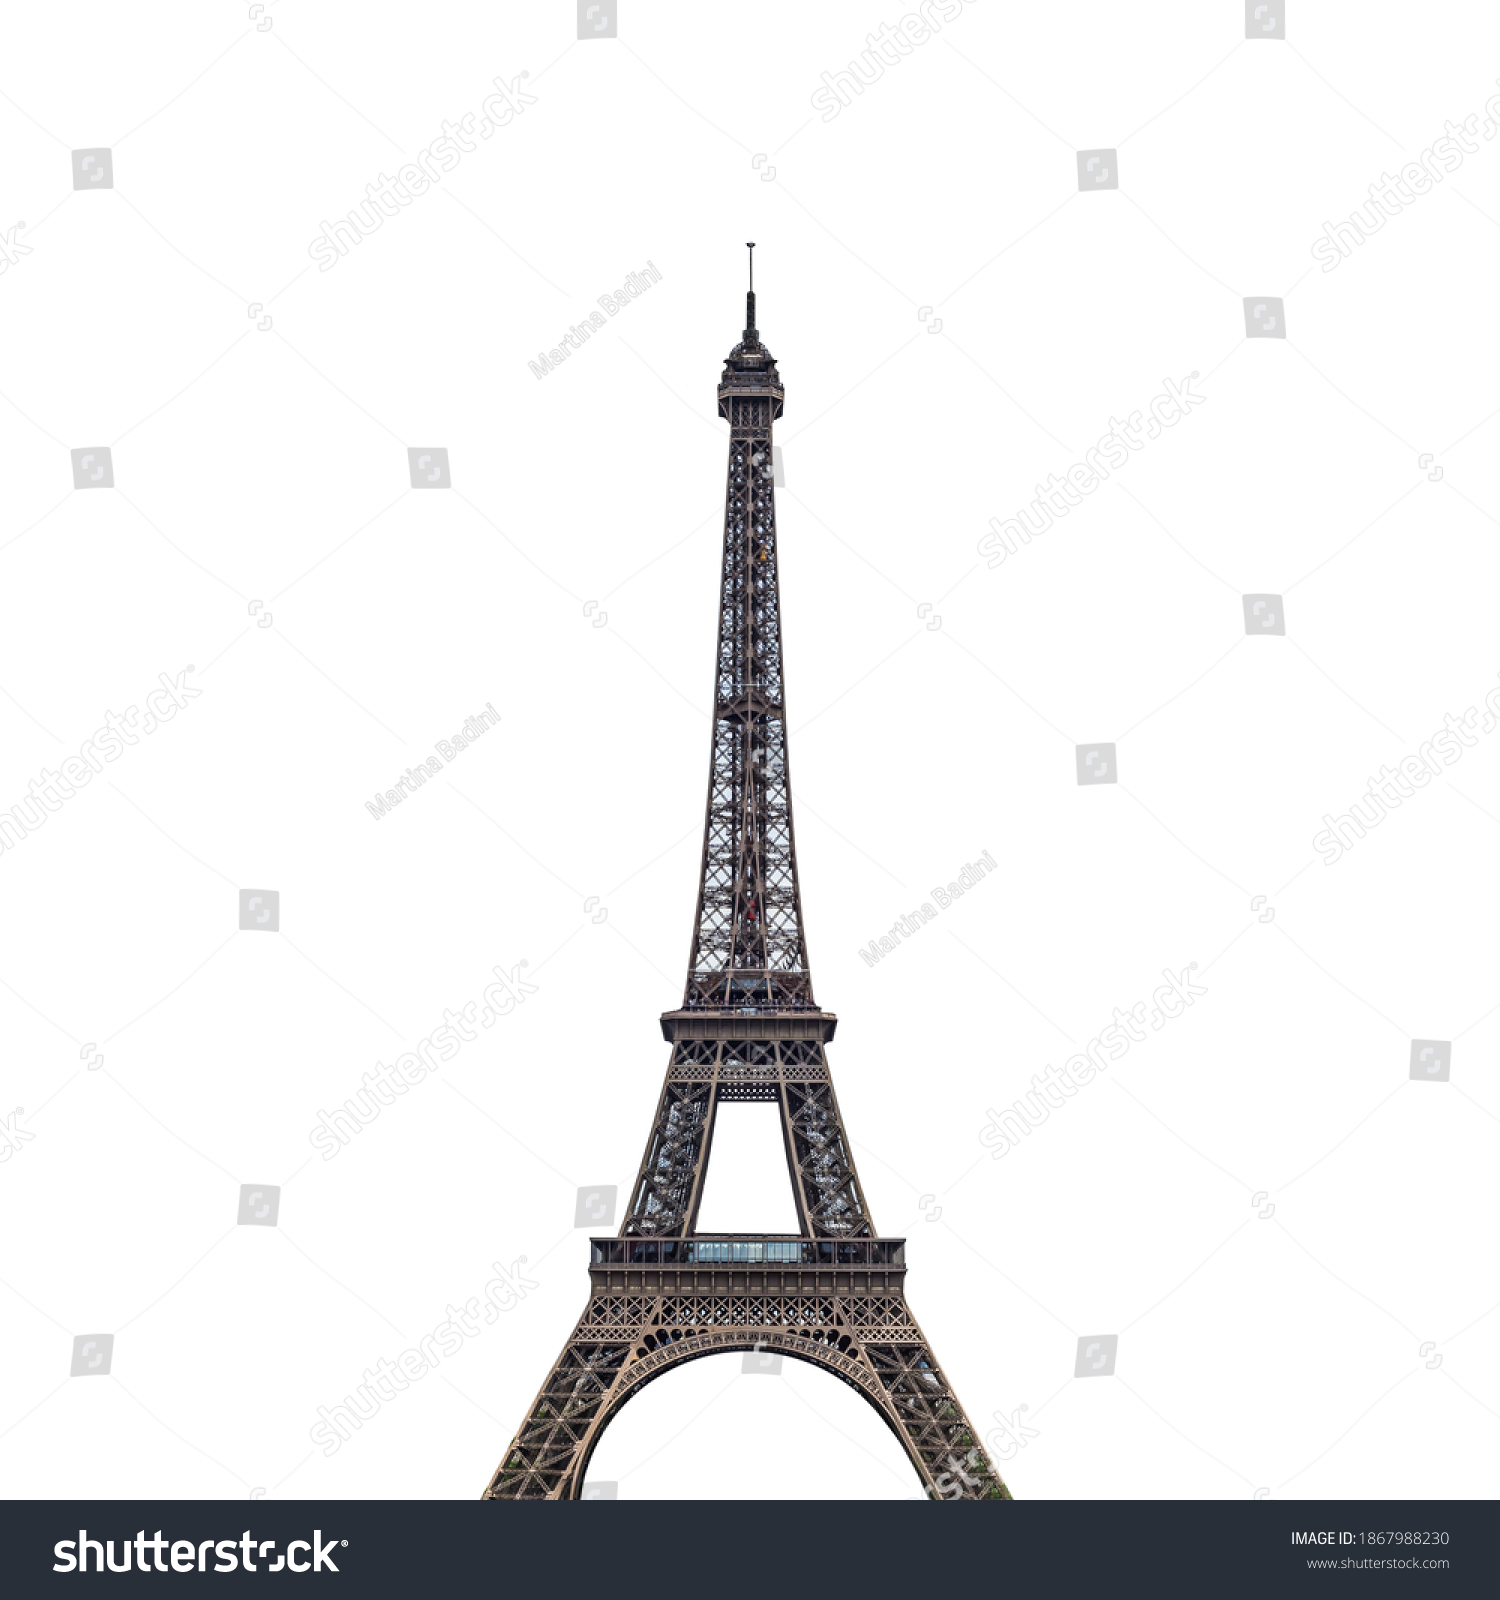 Eiffel Tower (Paris, France) isolated on white background #1867988230